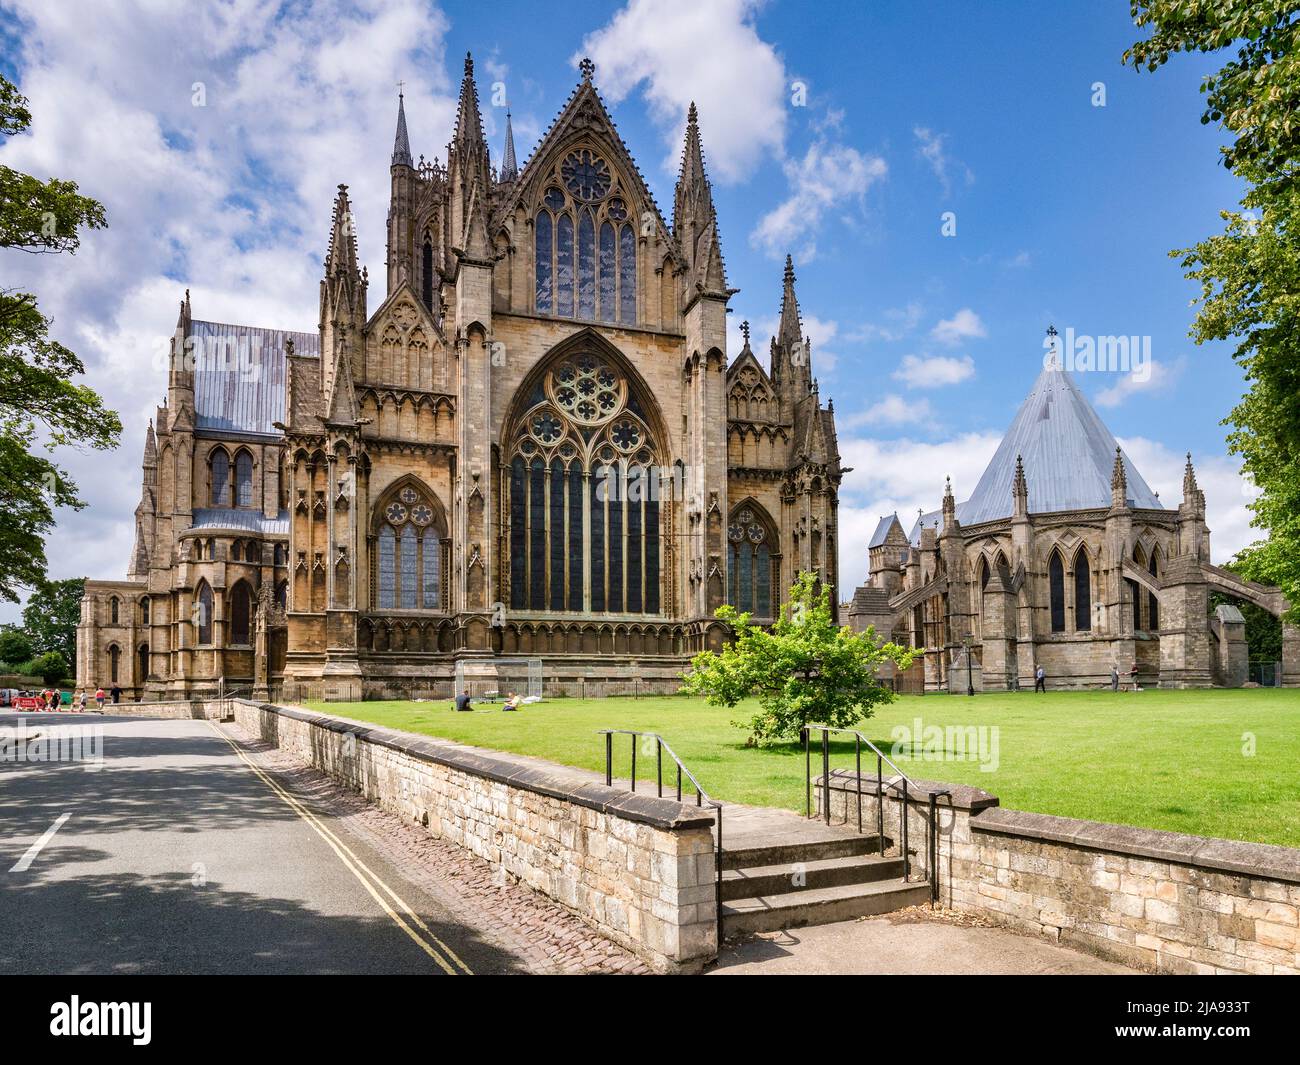 3 July 2019: Lincoln, UK, The cathedral and chapter house. Work is being done on the cathedral, and workmen can be seen. Stock Photo